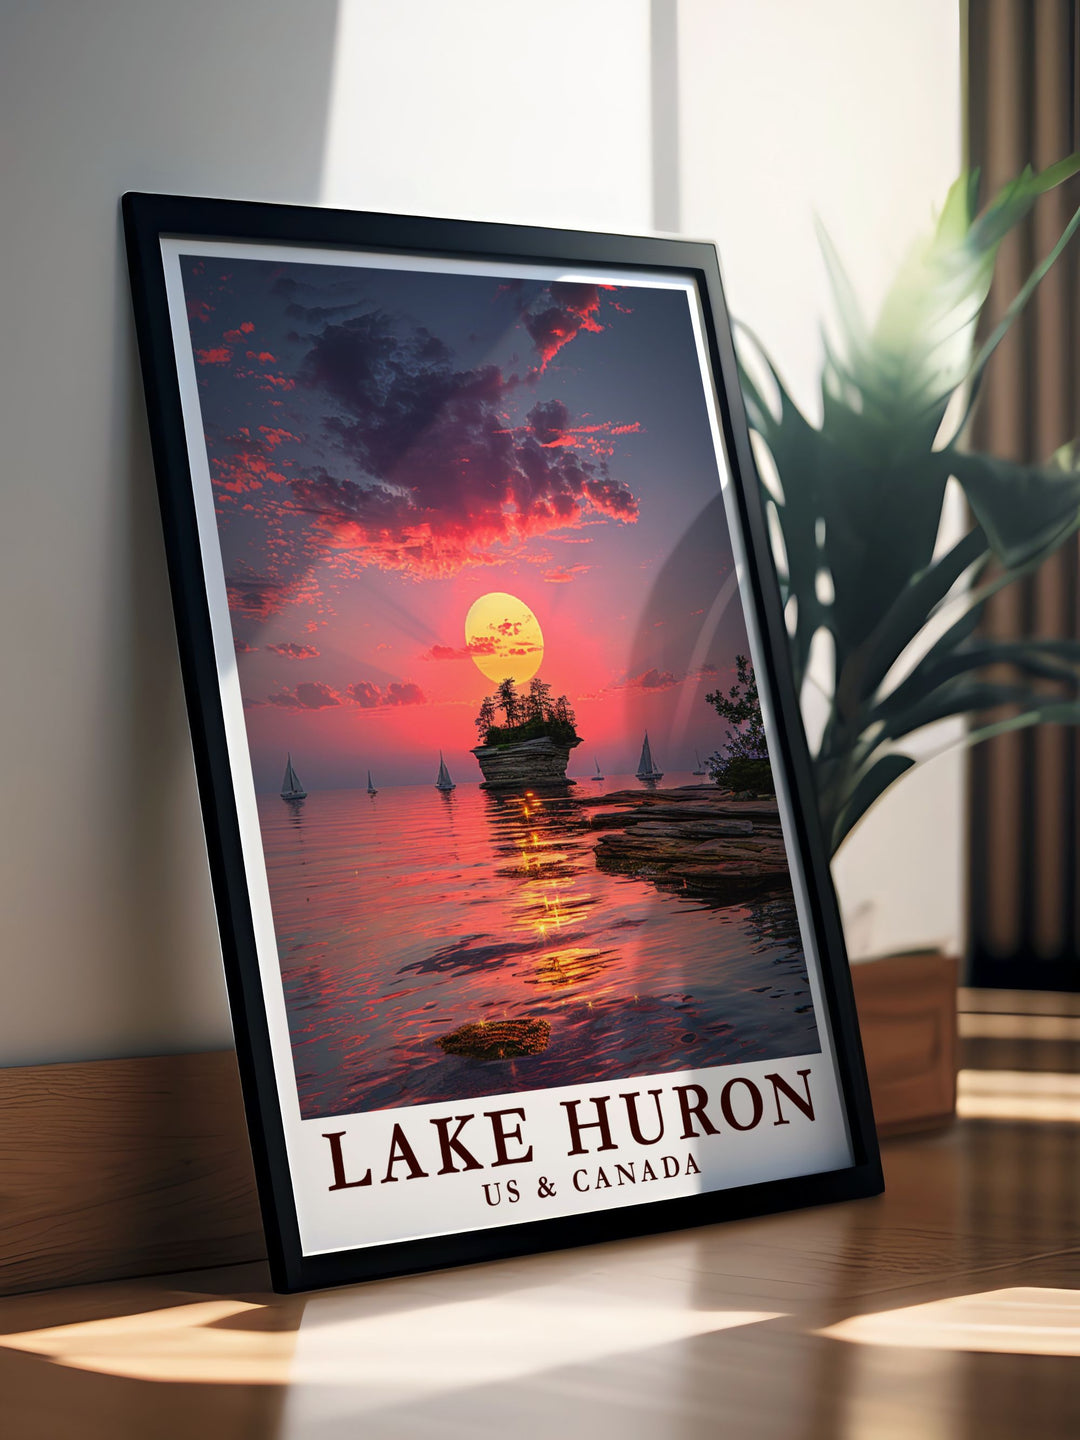 Transform your living room with the Lake Huron framed prints. These beautiful artworks bring the serene and picturesque landscapes of Lake Huron into your home creating a sophisticated and calming environment for you to enjoy every day